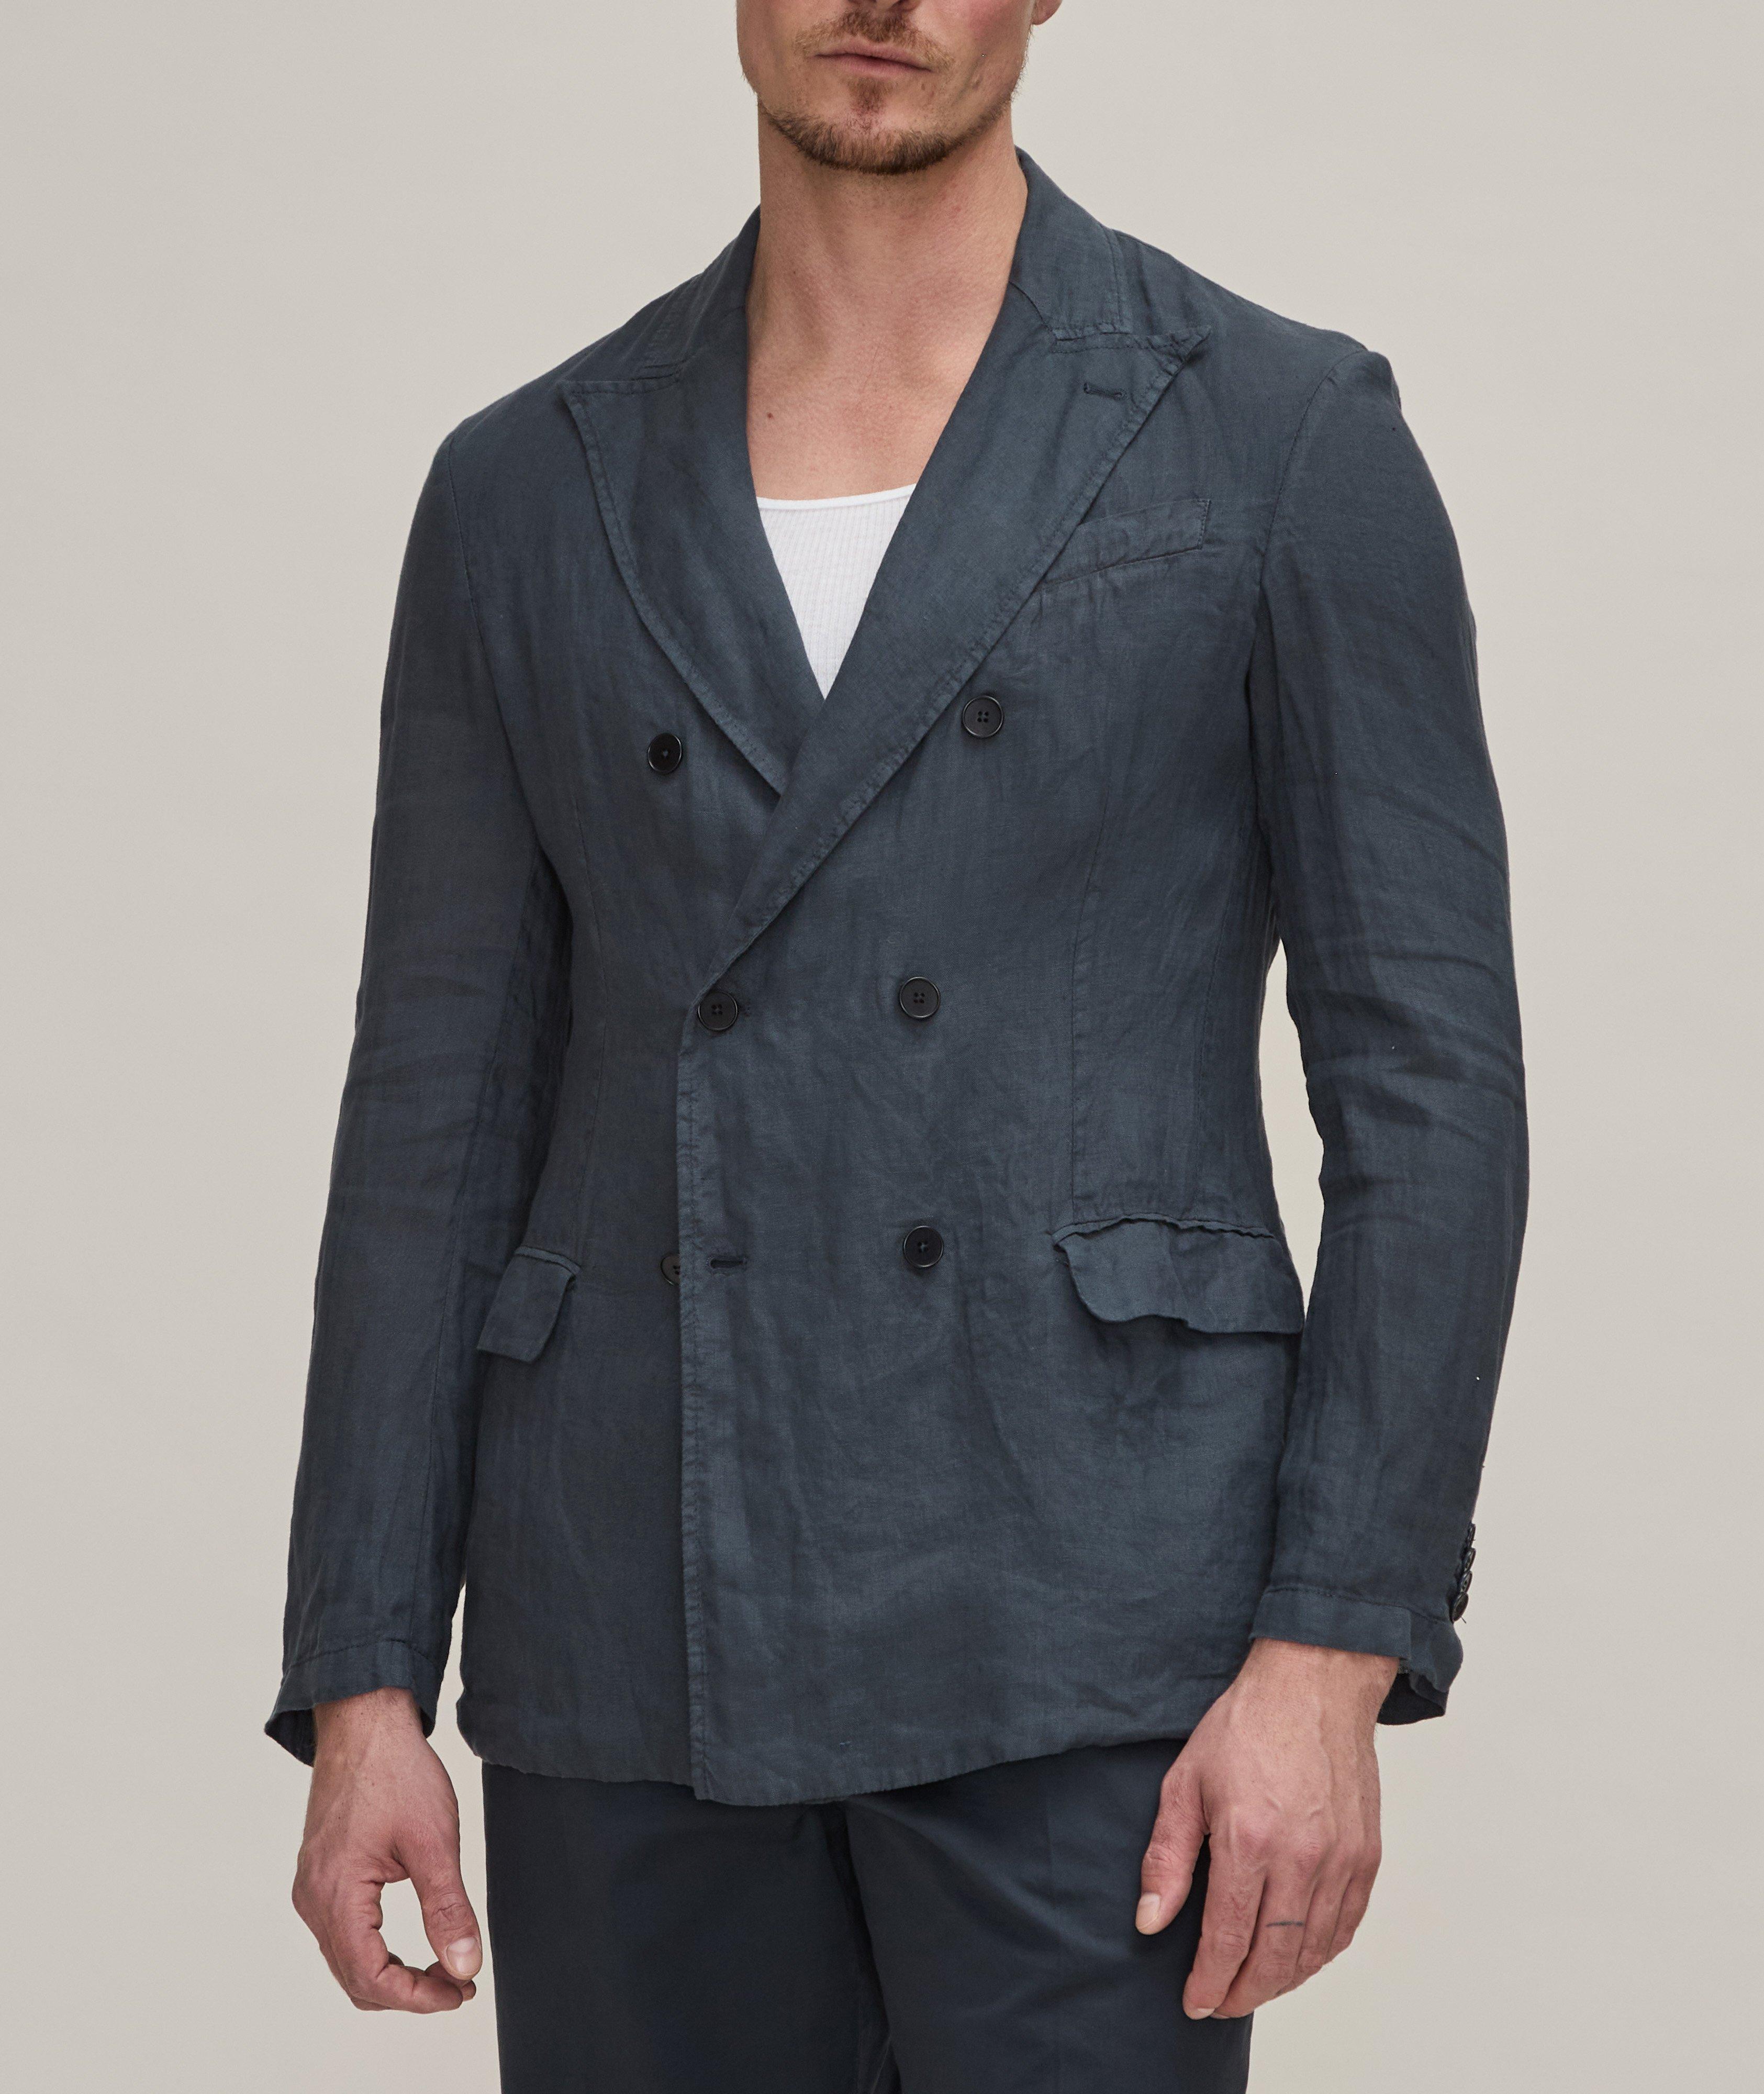 Double-Breasted Linen Sport Jacket image 1